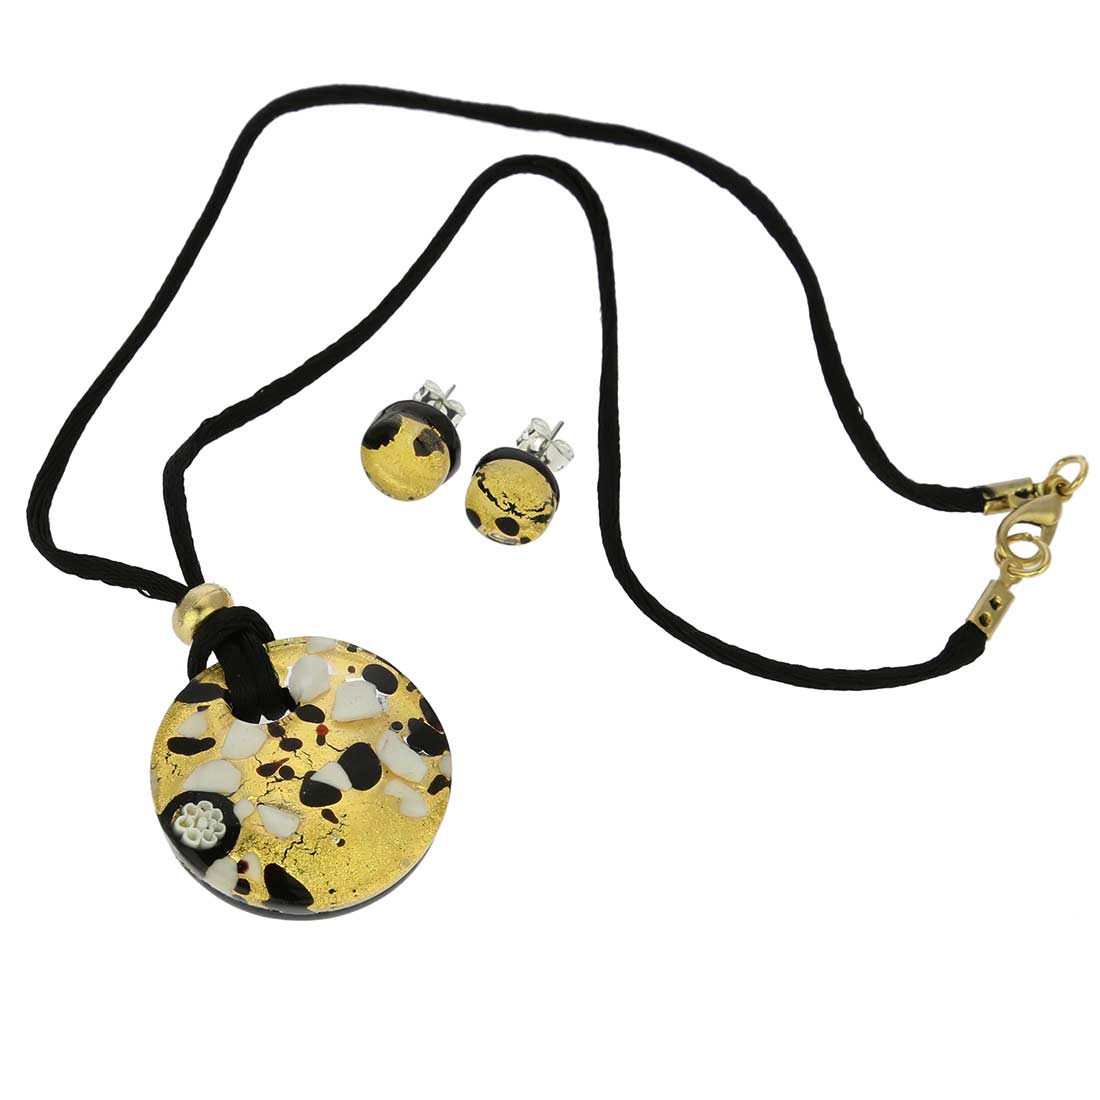 Venetian Reflections Round Necklace and Earrings Set - Black Gold